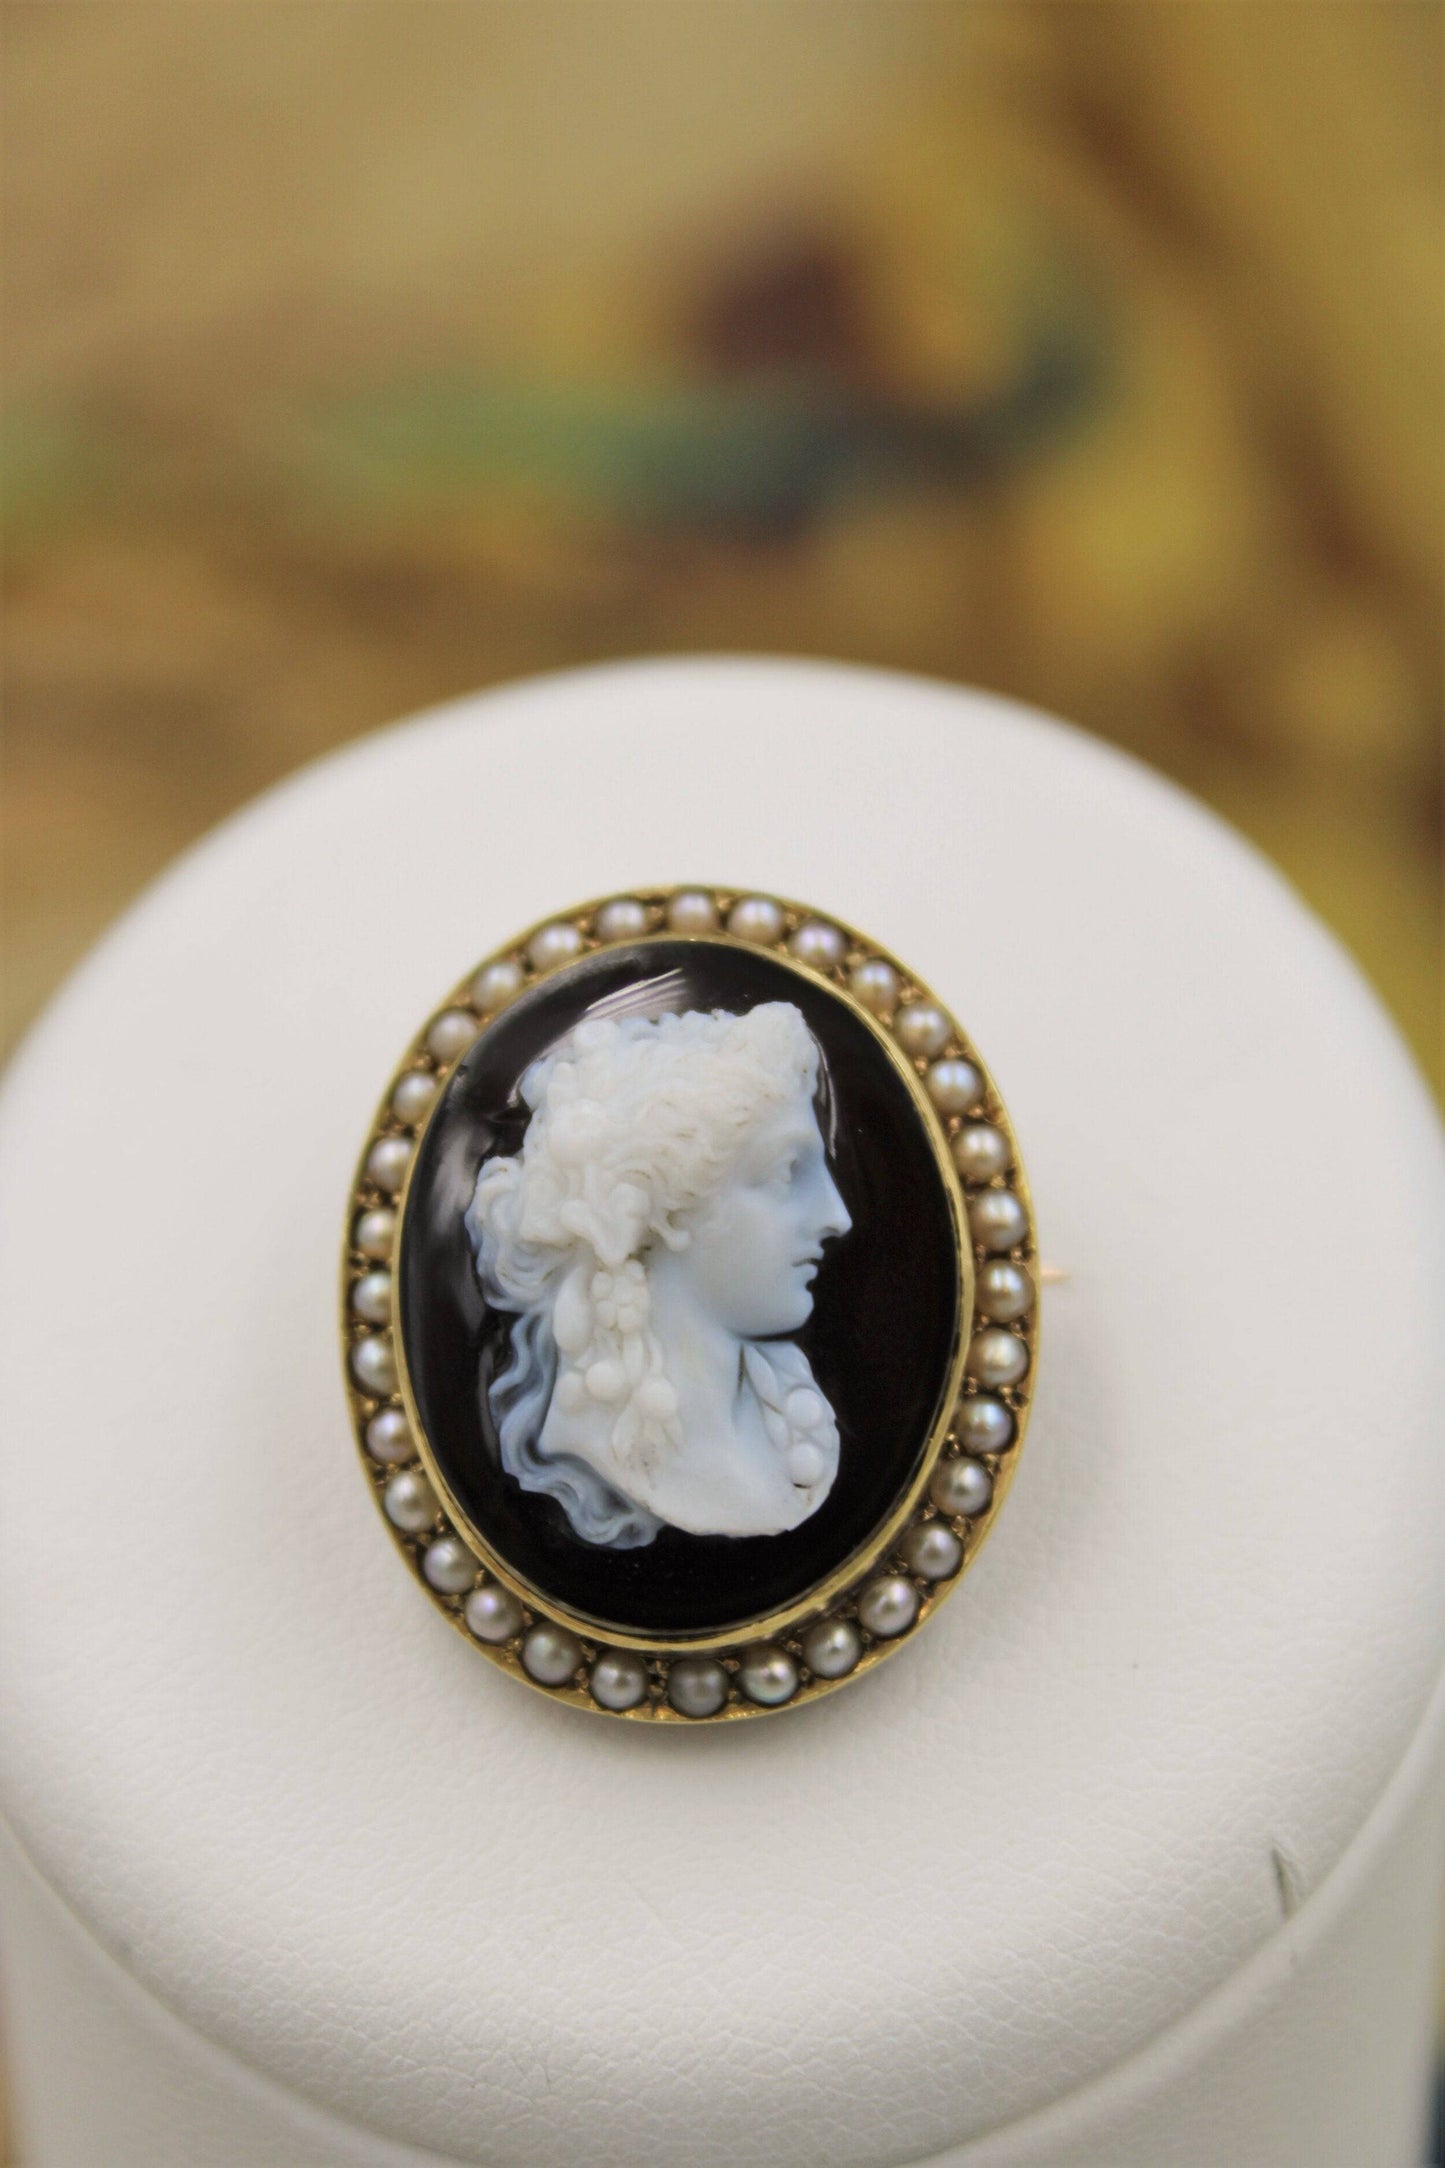 A very fine Hardstone & Natural Pearl Cameo Brooch in 15ct Yellow Gold, Circa 1870-1880 - Robin Haydock Antiques